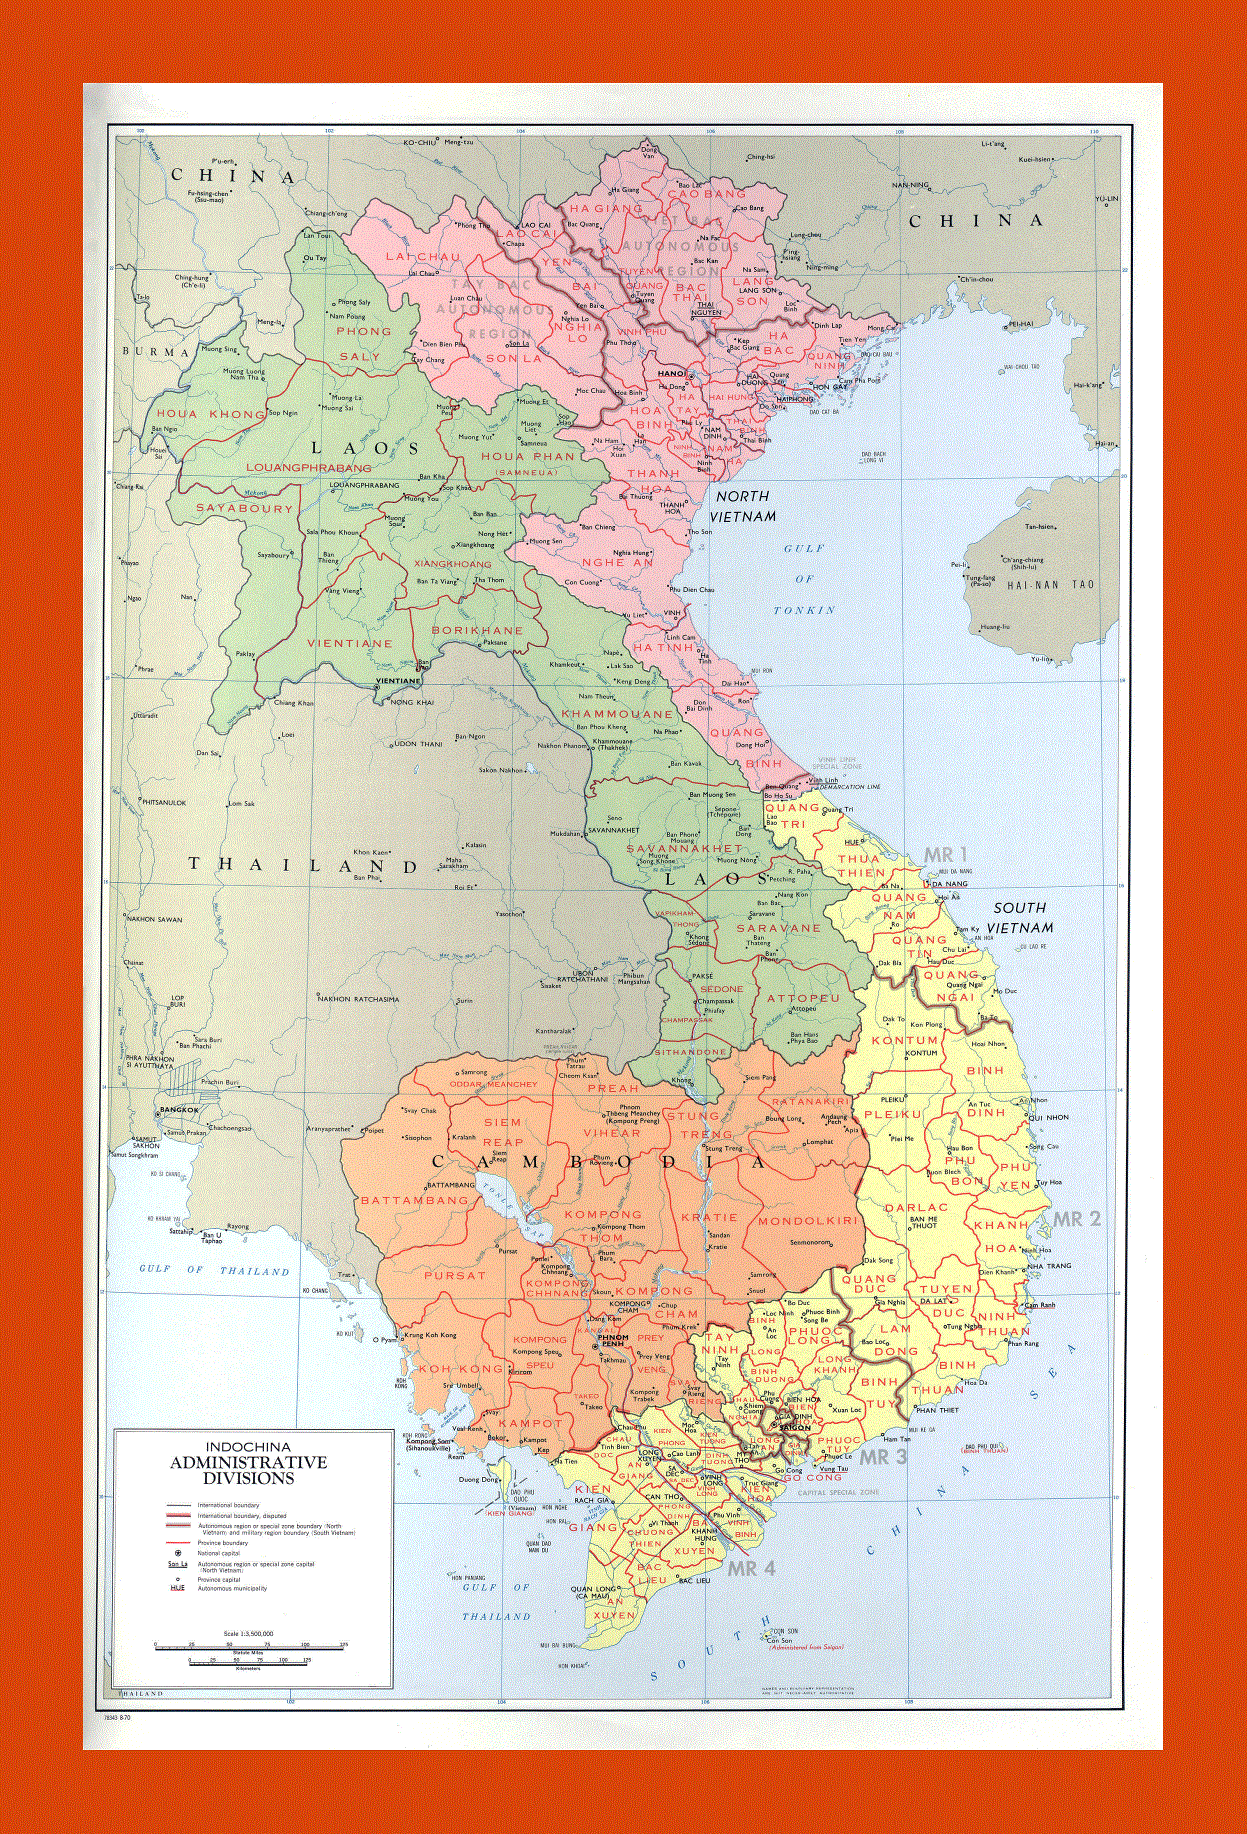 Administrative divisions map of Indochina - 1970